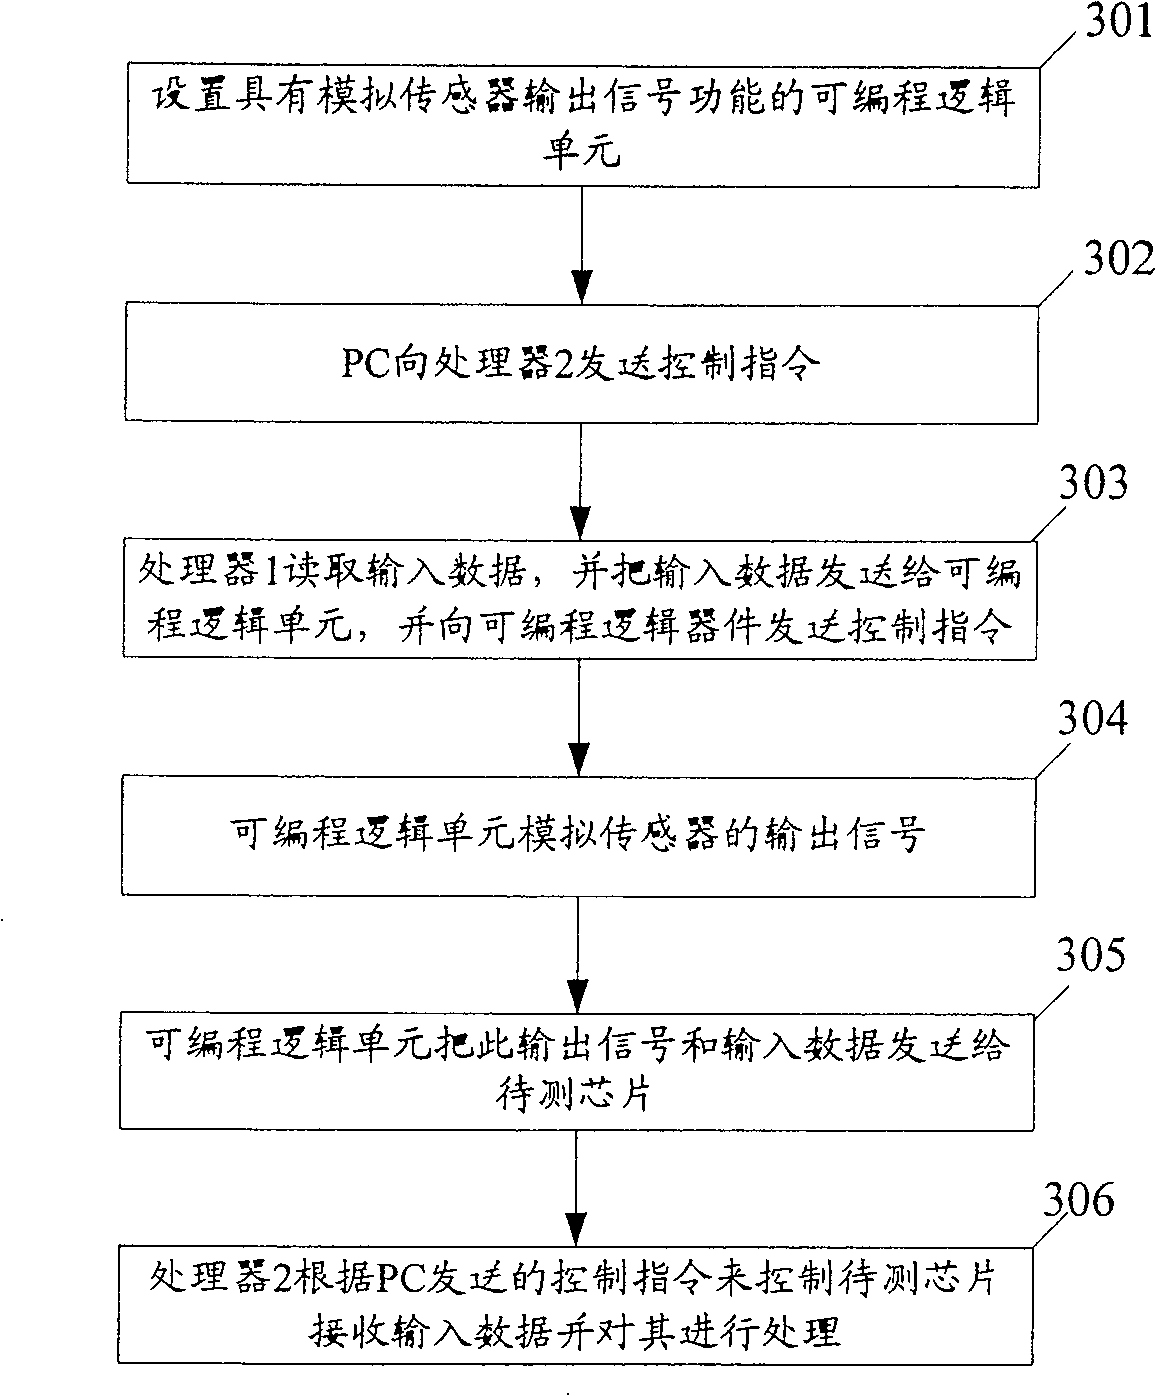 Method and system for testing chip